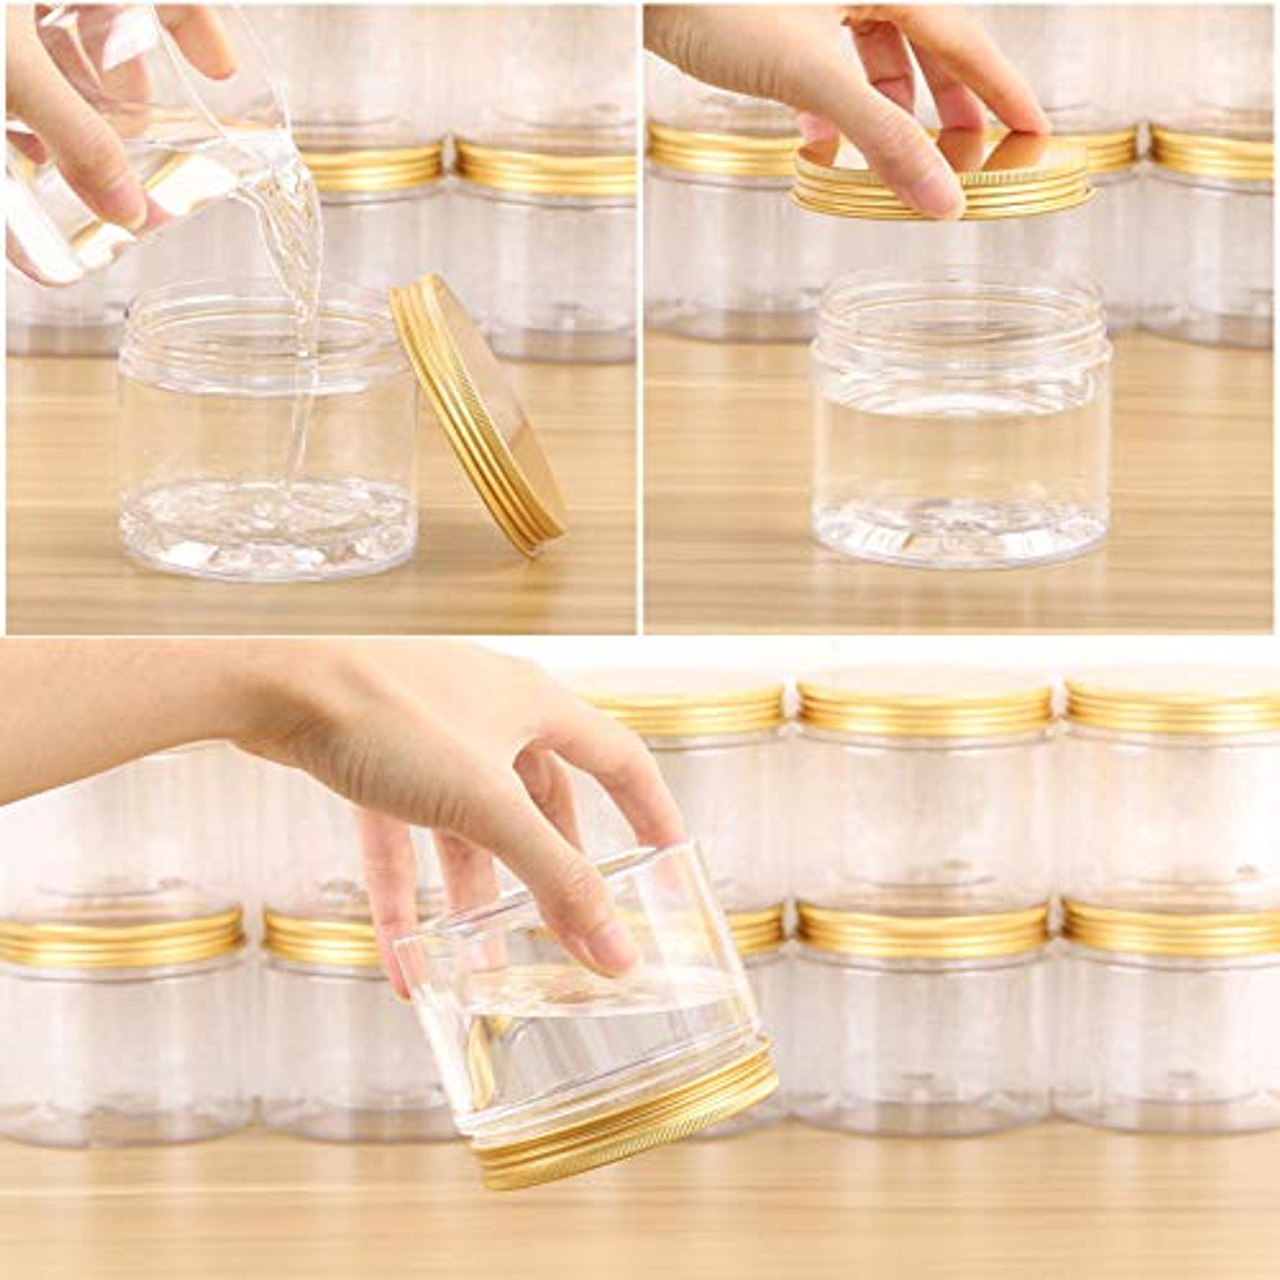 24 Pack Slime Containers with Lids - Reusable, Translucent, No Leak, H